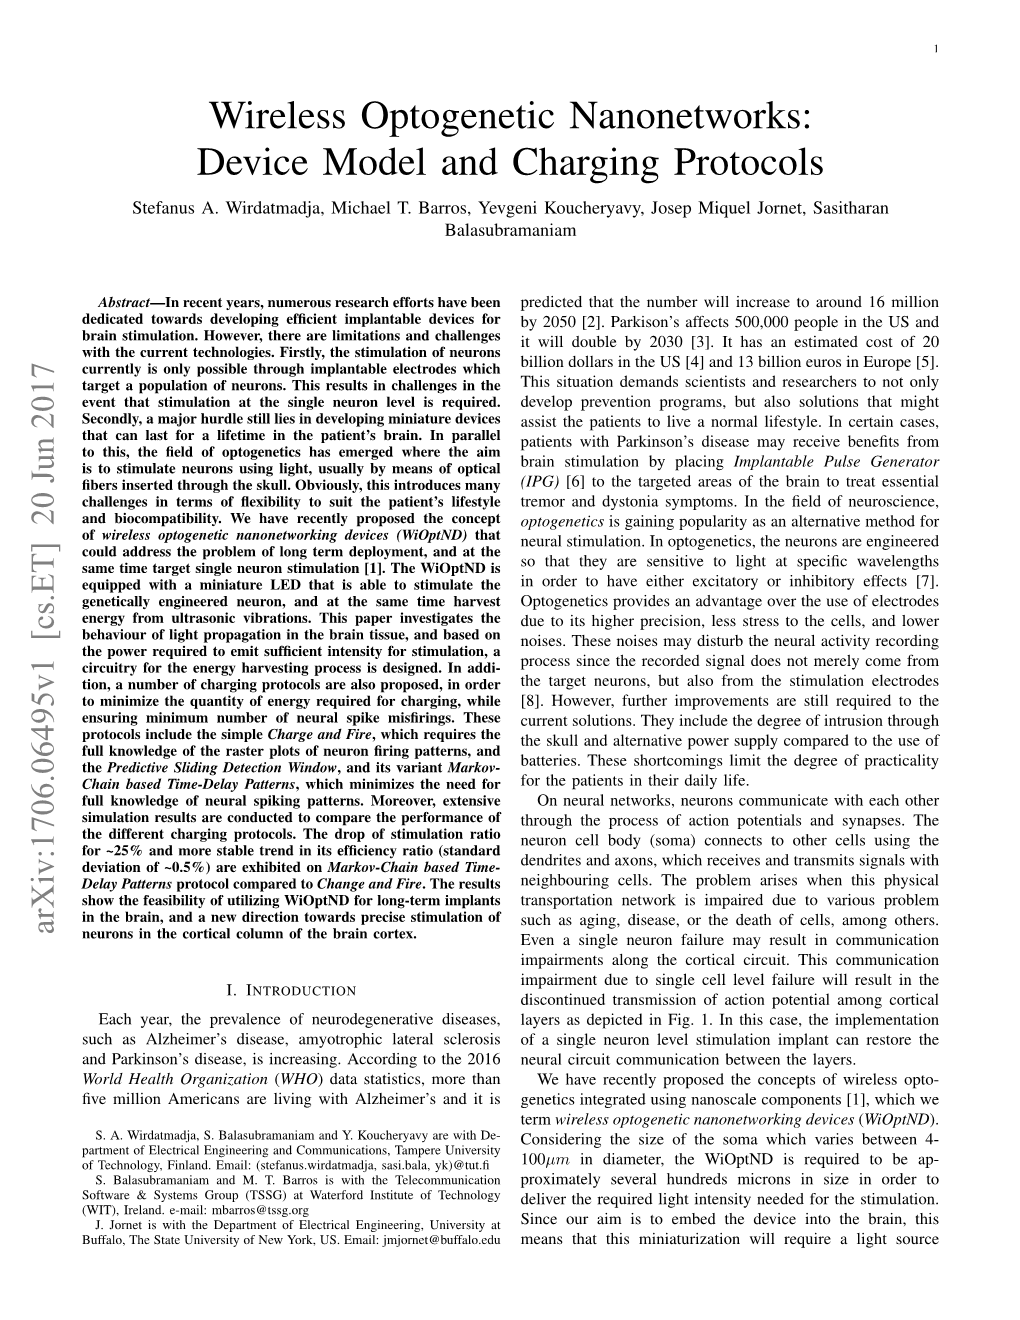 Wireless Optogenetic Nanonetworks: Device Model and Charging Protocols Stefanus A